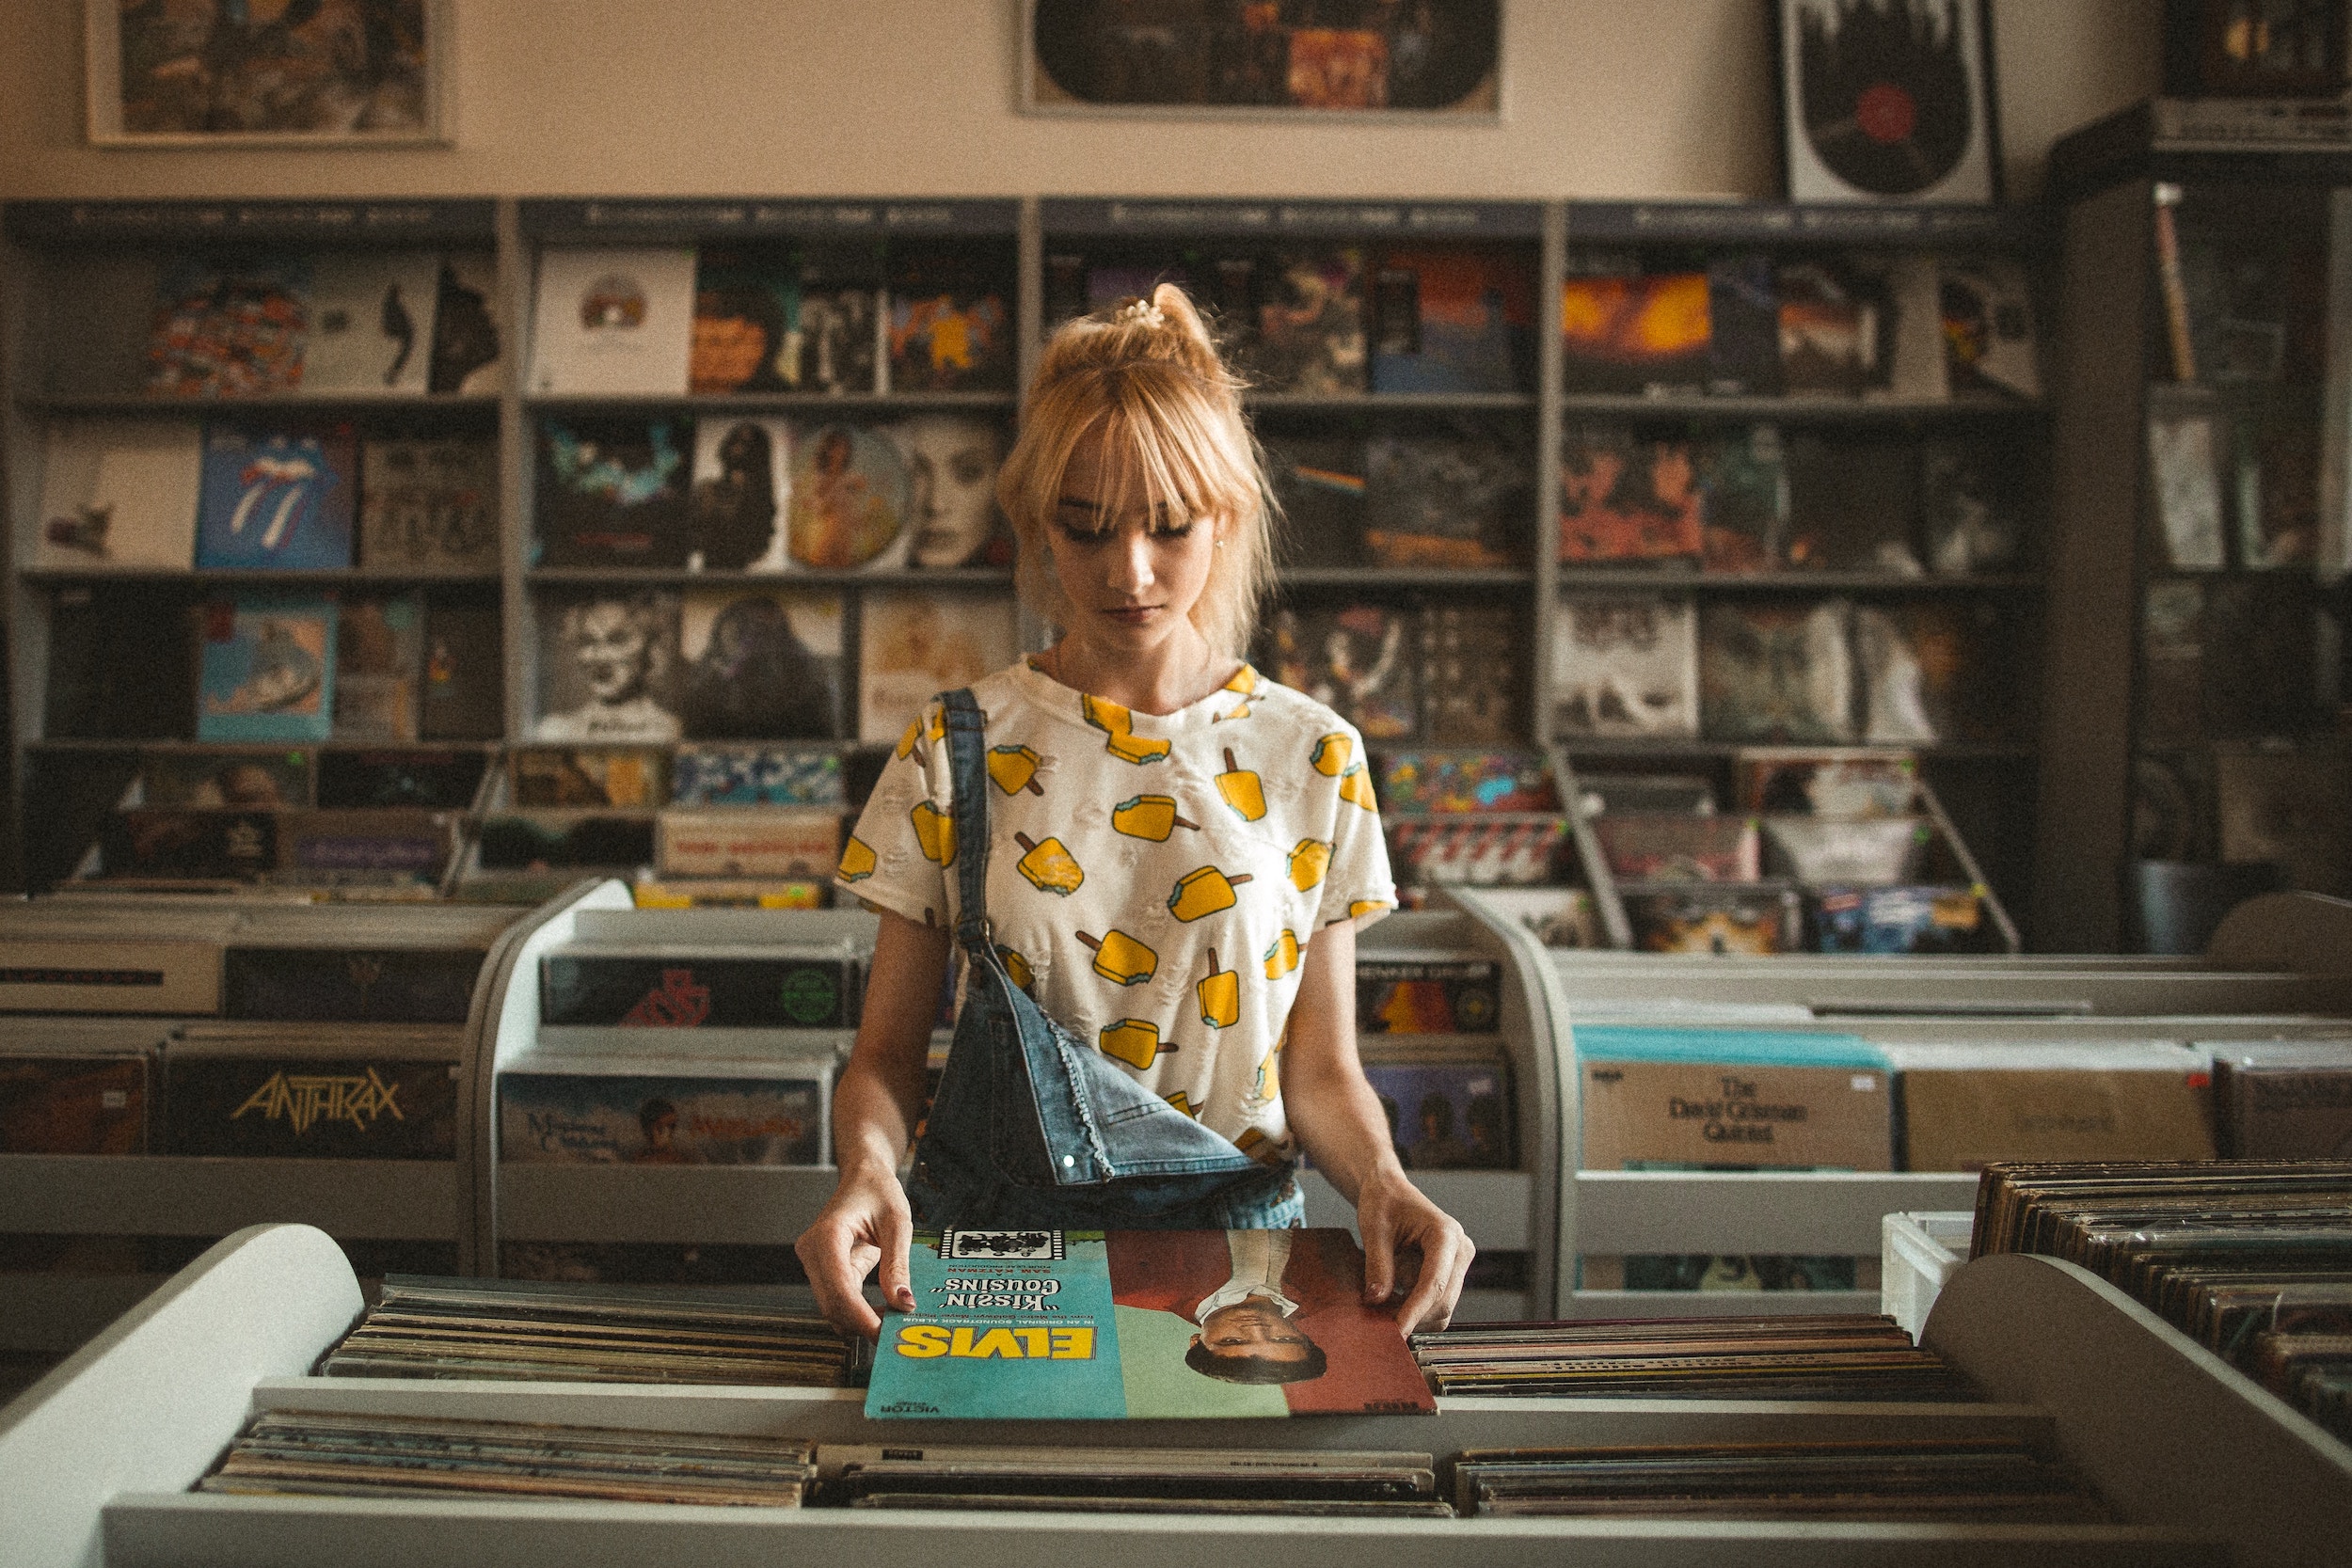 Woman at a record store